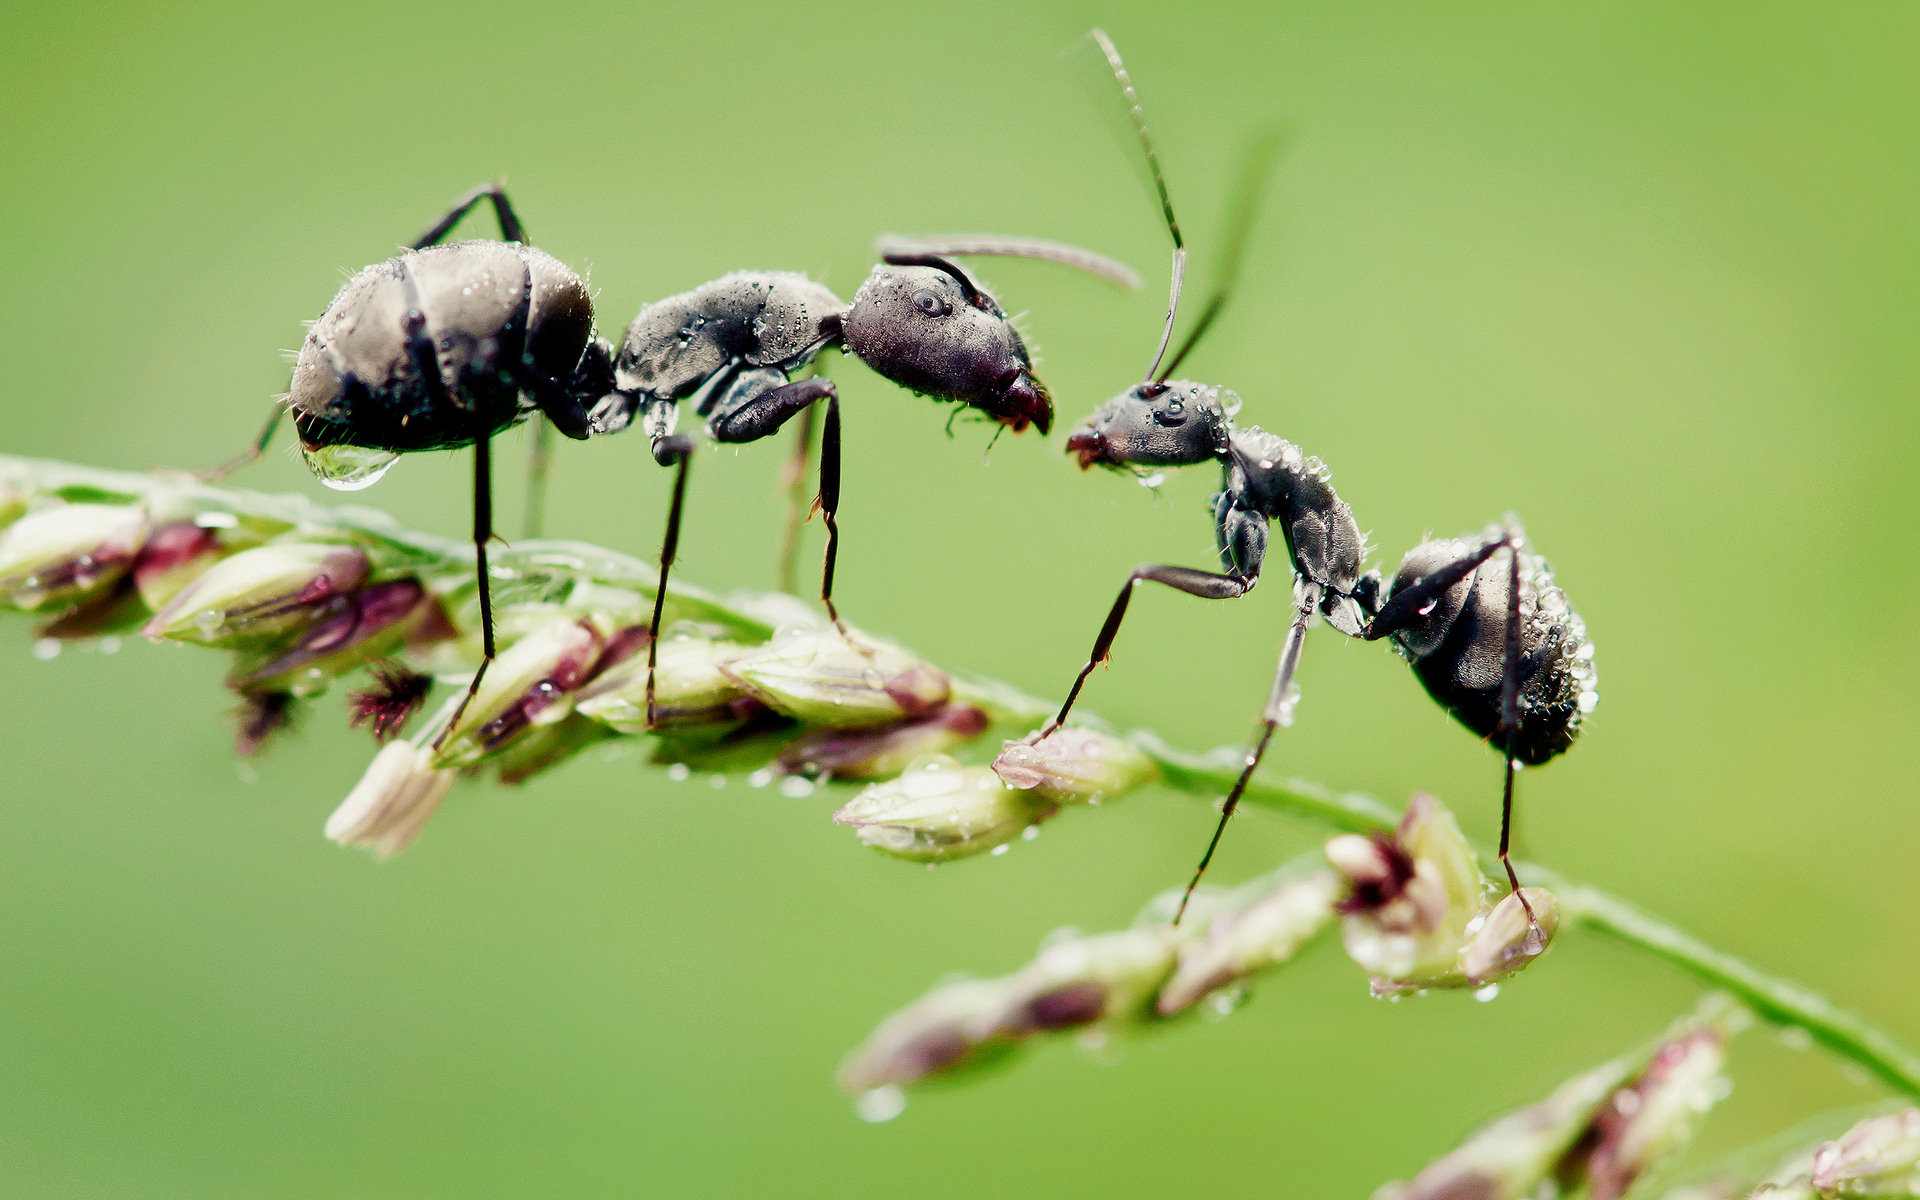 Ant wallpaper, Dynamic ant image, Eye-catching design, Perfect for screens, 1920x1200 HD Desktop